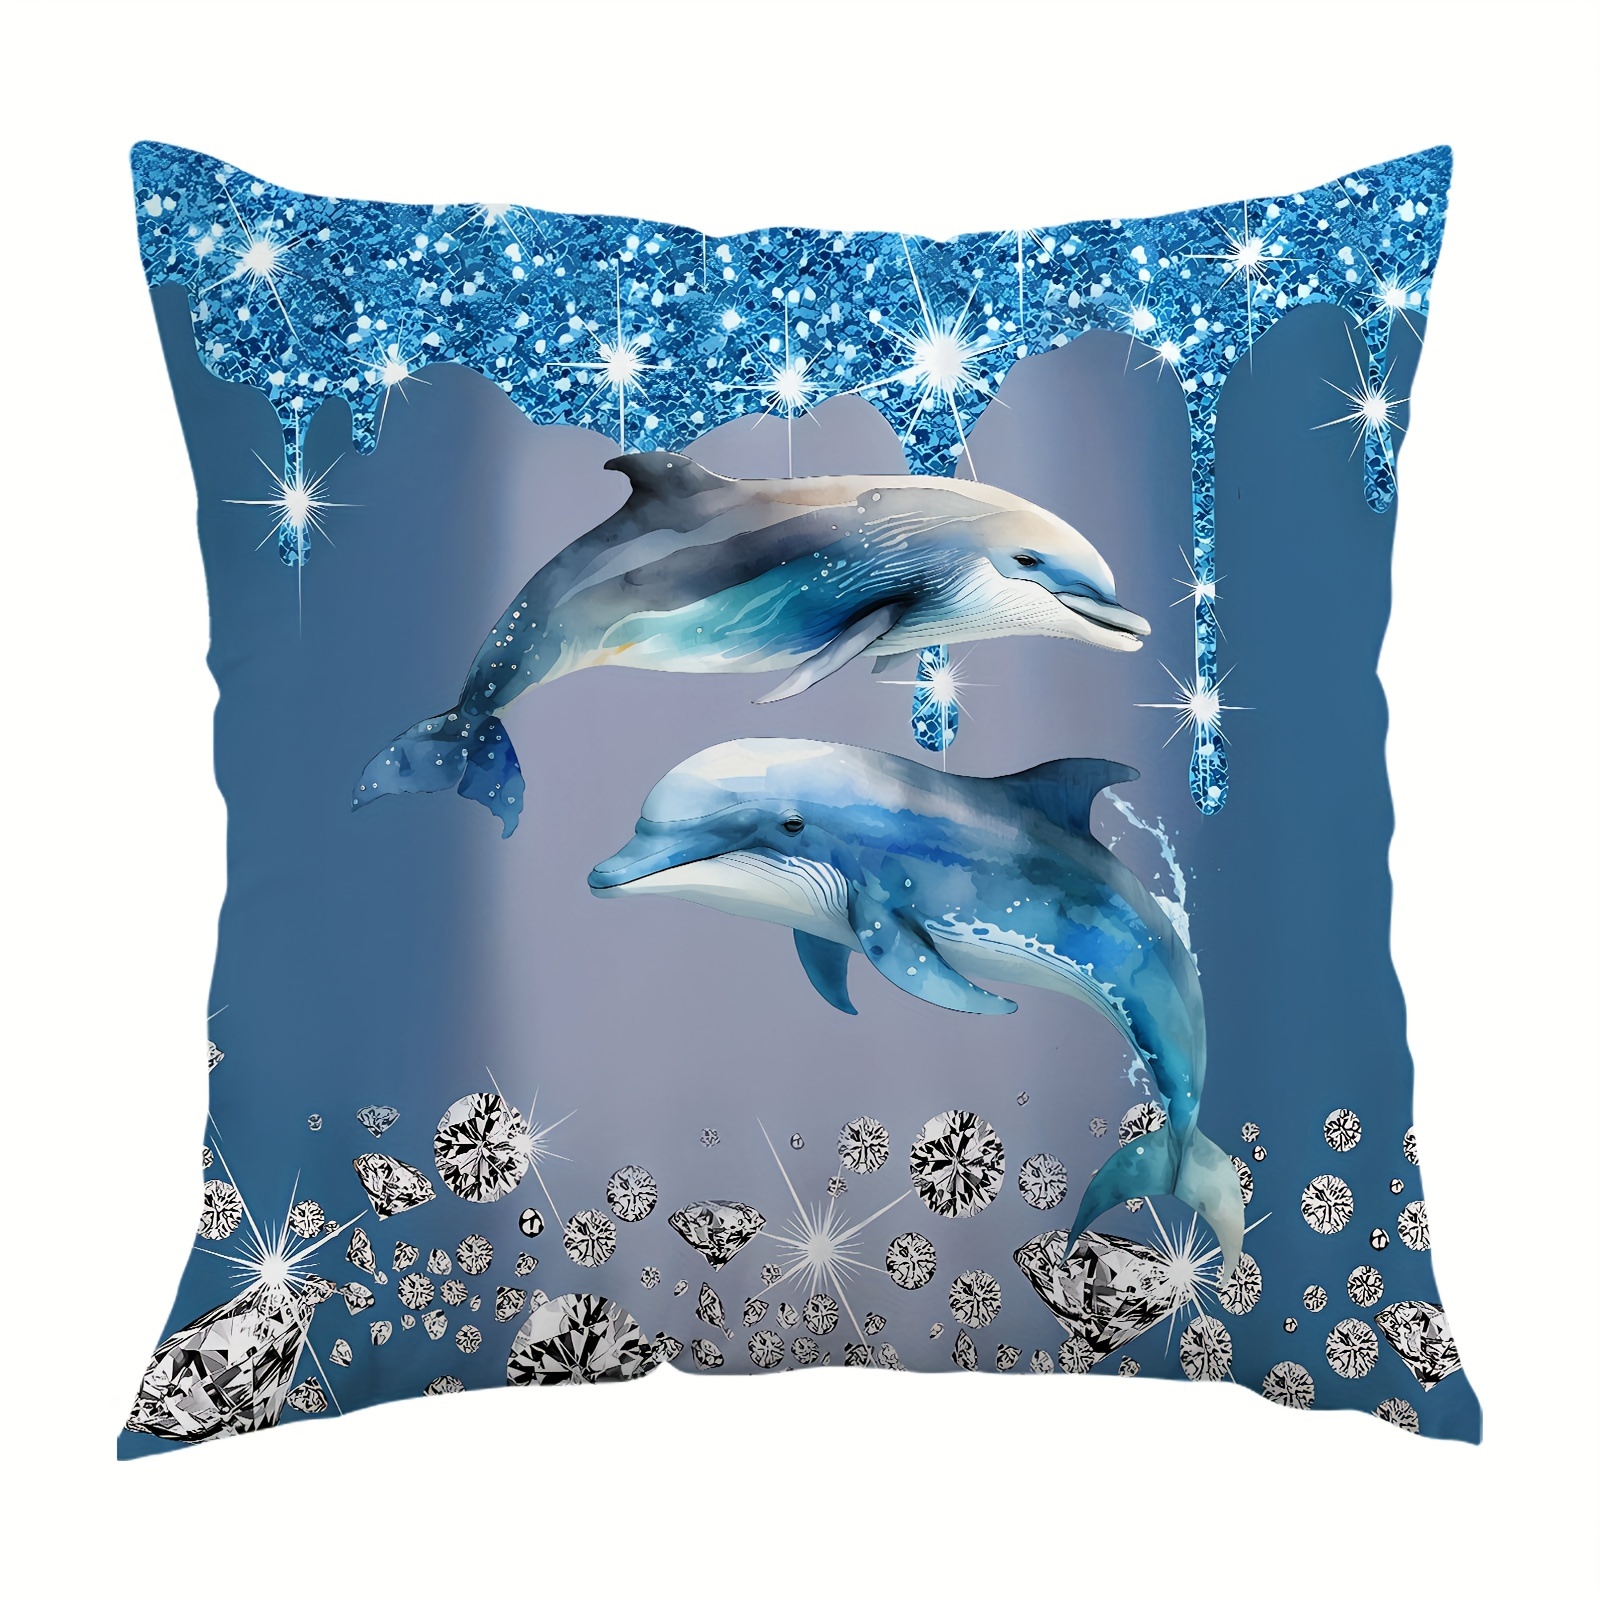 

Blue Starlight Diamond Dolphin Plush Throw Pillow Cover, 18x18 Inches - Zippered Single-sided Print For Sofa & Bedroom Decor, Machine Washable